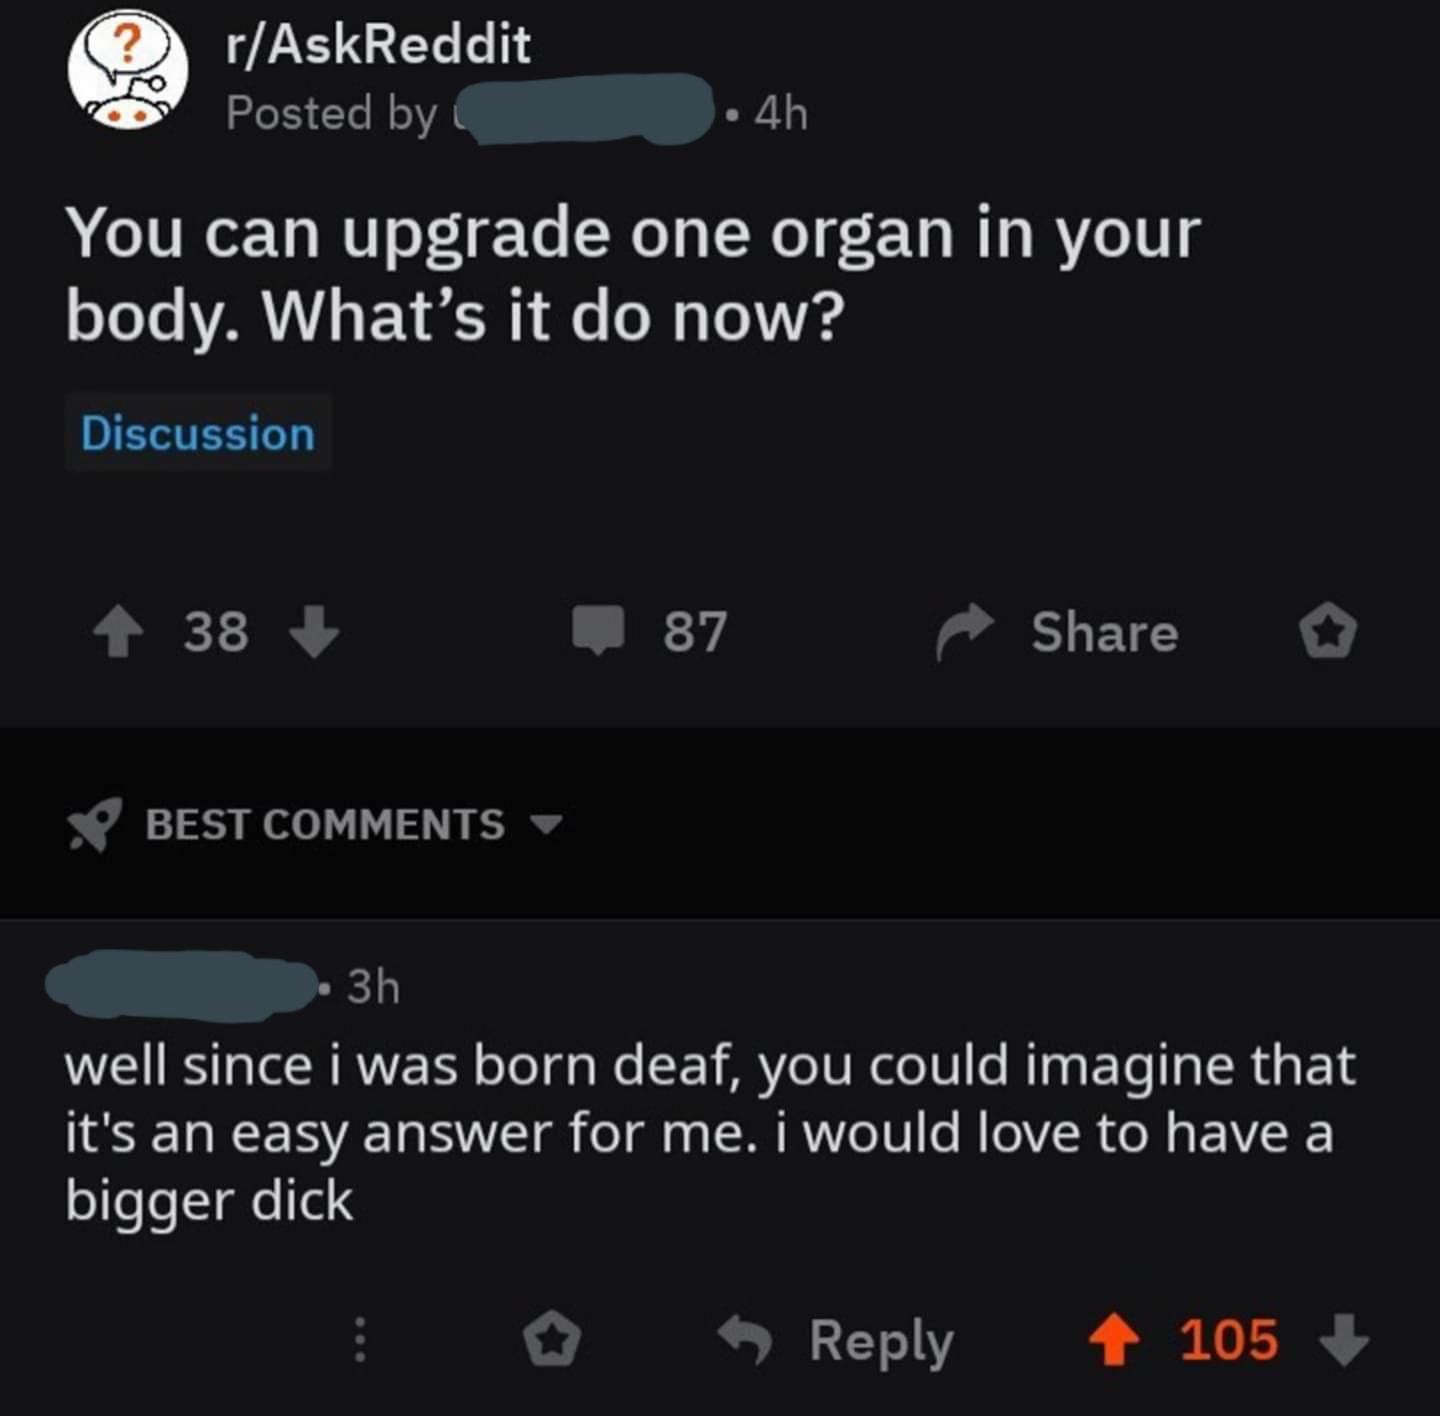 screenshot - rAskReddit Posted by 4h You can upgrade one organ in your body. What's it do now? Discussion 38 87 Best 3h well since i was born deaf, you could imagine that it's an easy answer for me. I would love to have a bigger dick 105